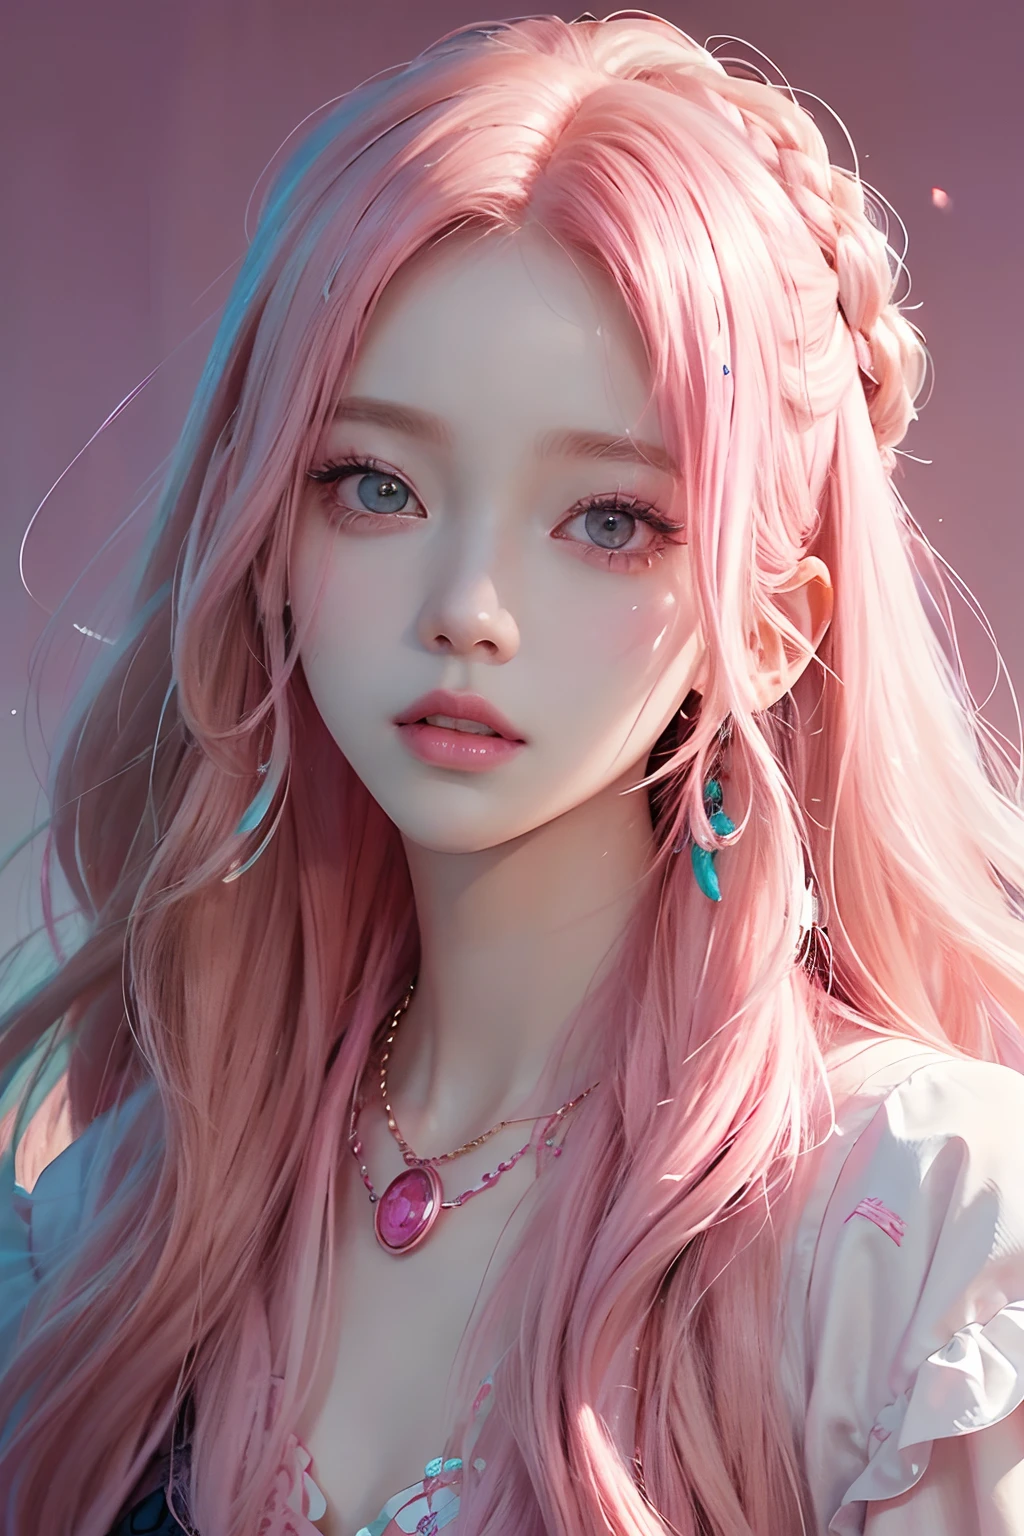 Close up of a man with blonde hair and necklace, digital art inspired by Yanjun Cheng, Tumblr, Rococo, portrait of jossi of blackpink, portrait jisoo blackpink, Flowing pink hair, Long flowing pink hair, long bubblegum hair, with pink hair, Pink girl, pink hues, ((Pink)), Long pink hair, pink straight hair, curly pink hair